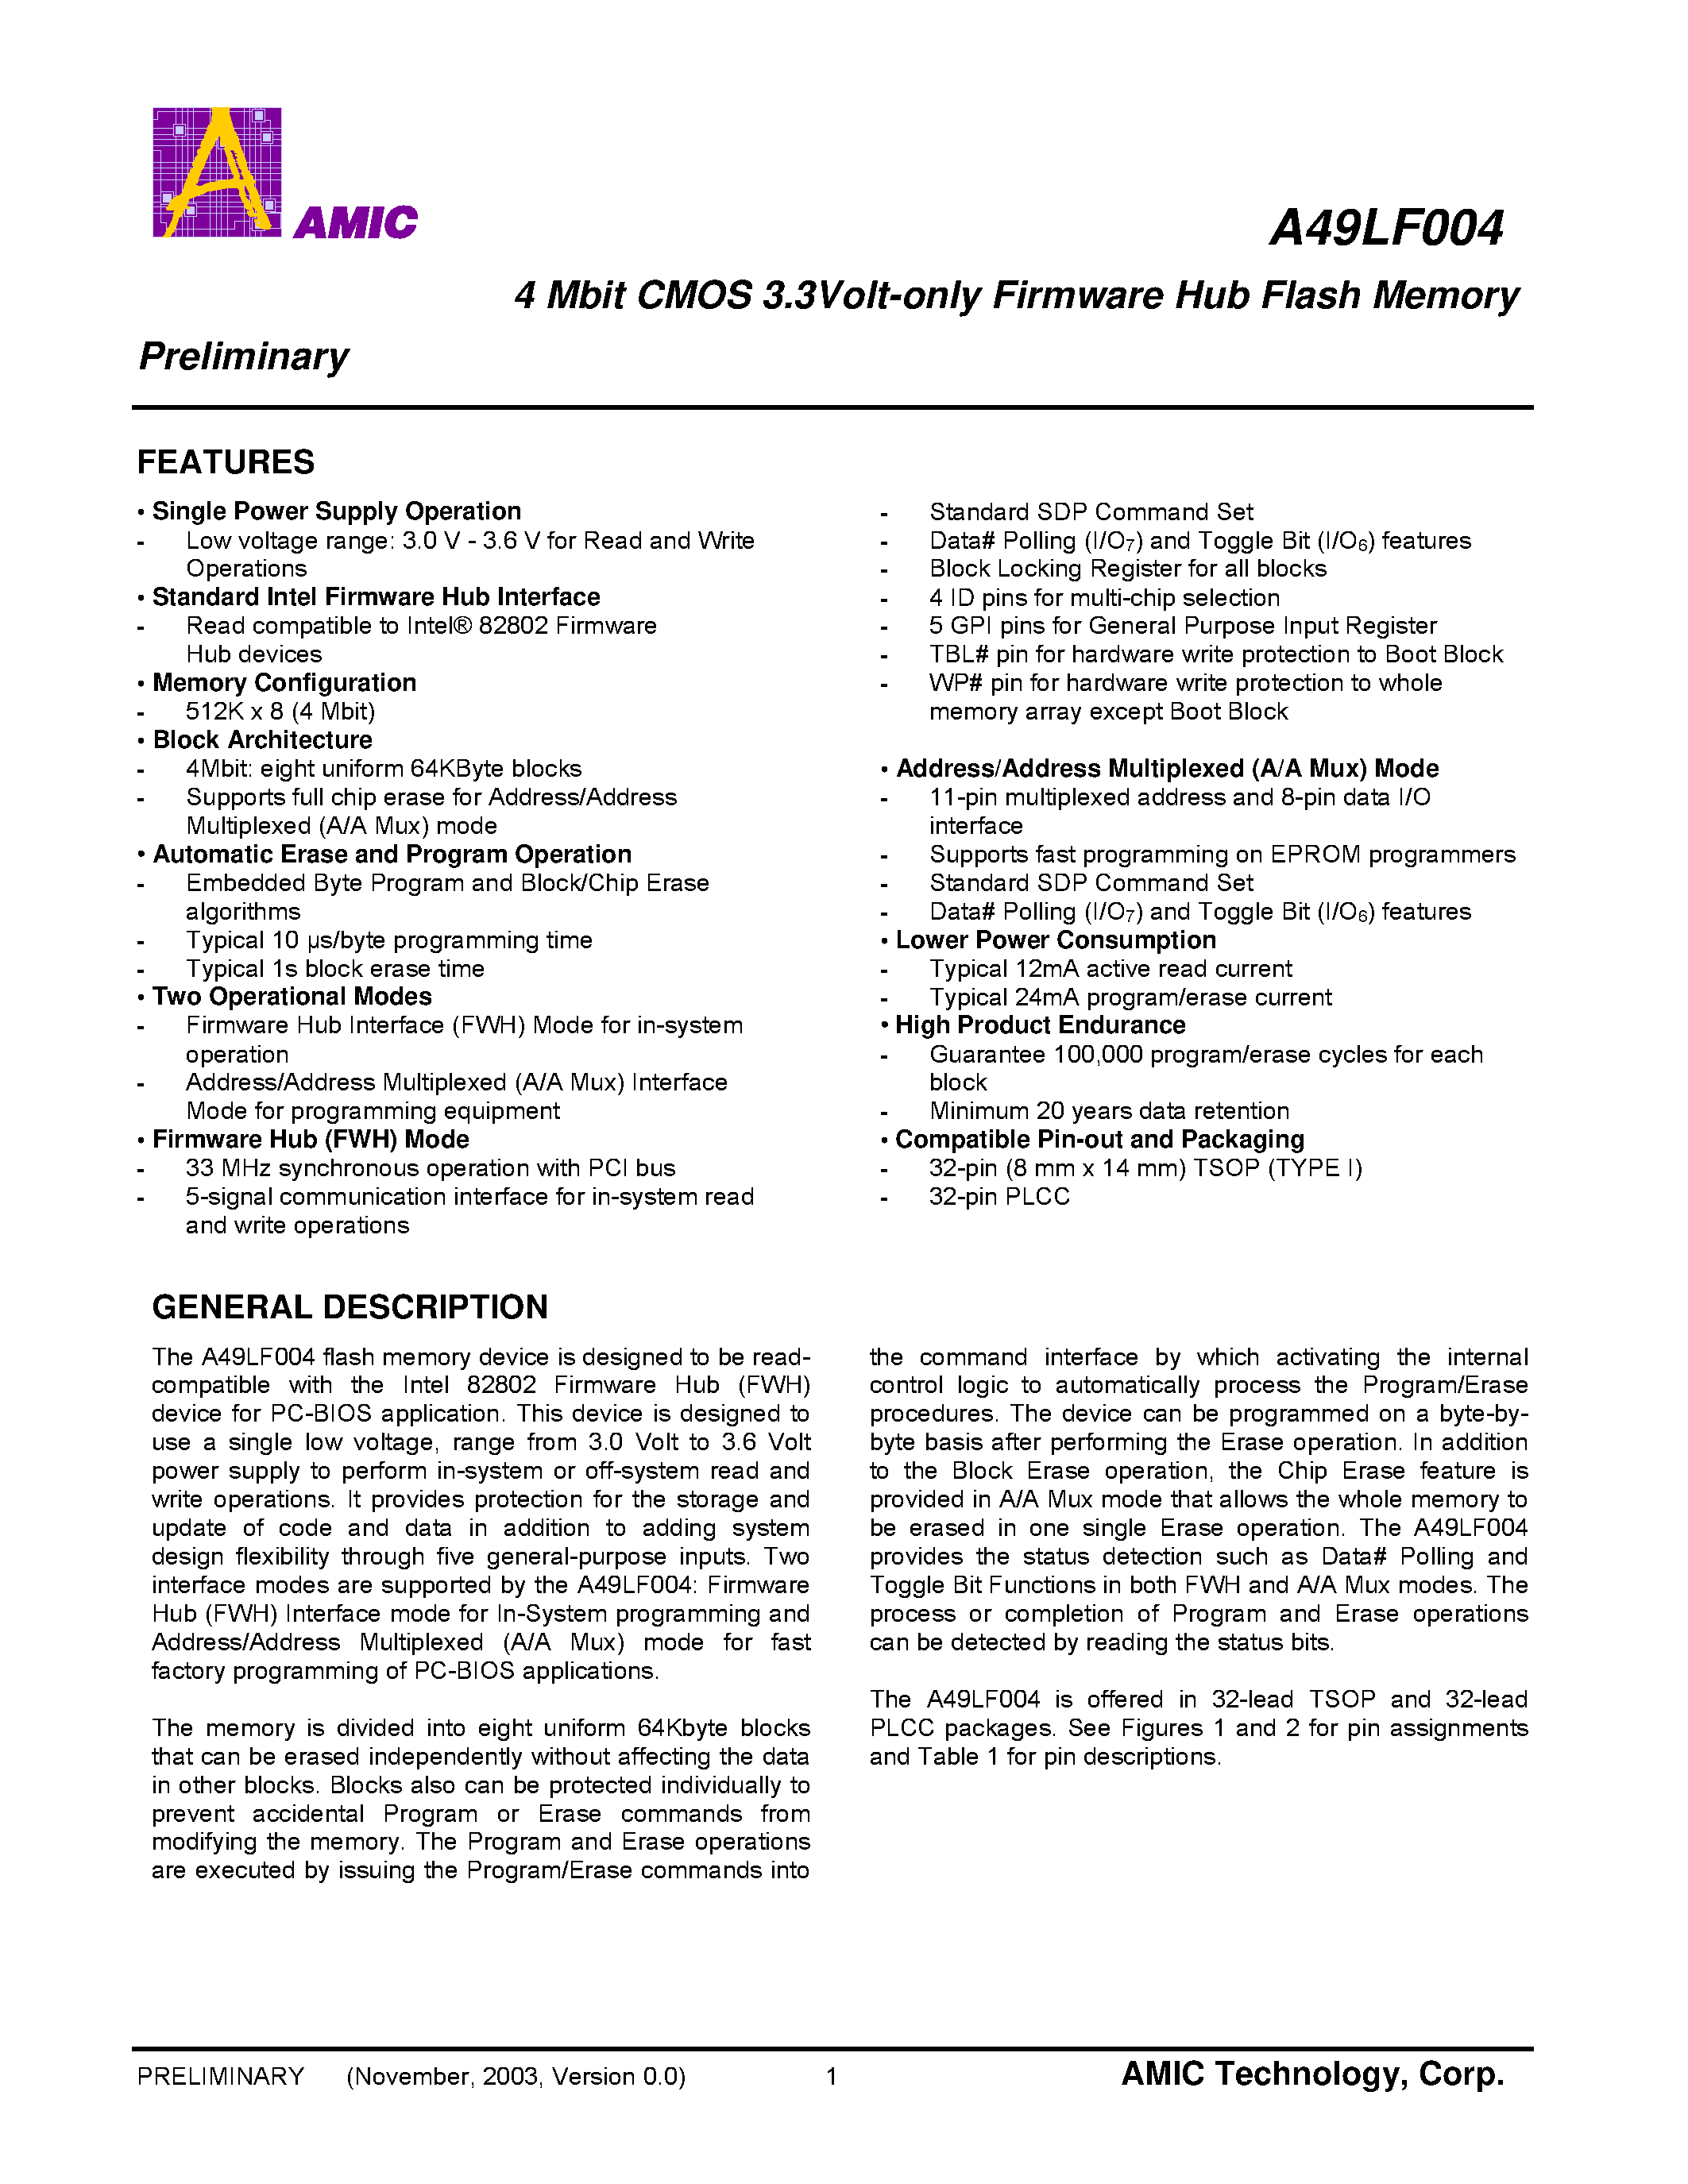 Datasheet A49LF004 - 4 Mbit CMOS 3.3Volt-only Firmware Hub Flash Memory page 2